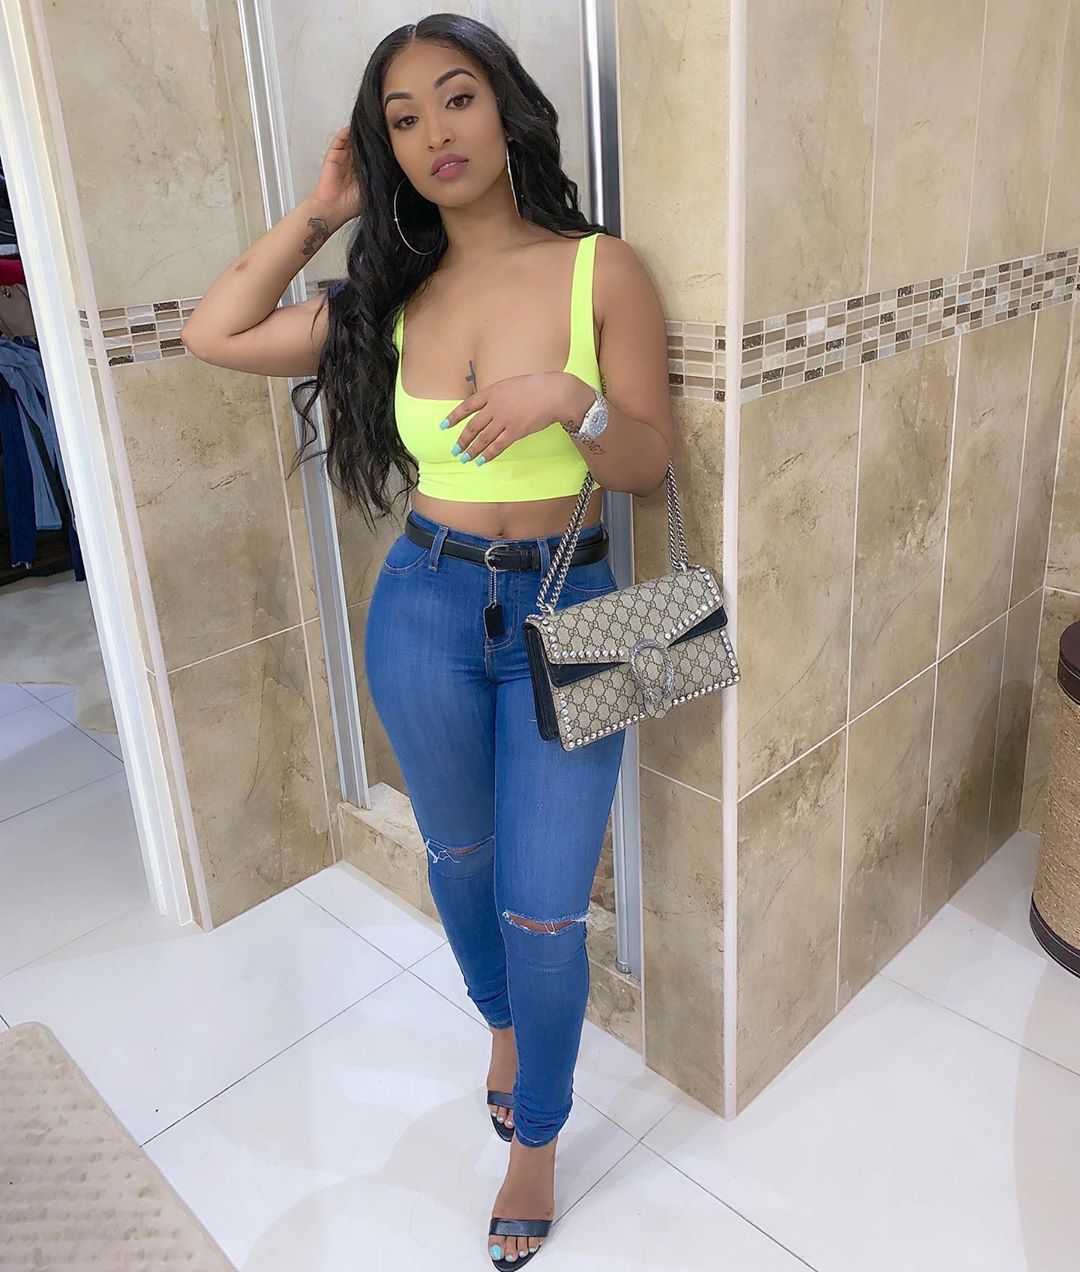 People who liked Shenseea's feet, also liked.